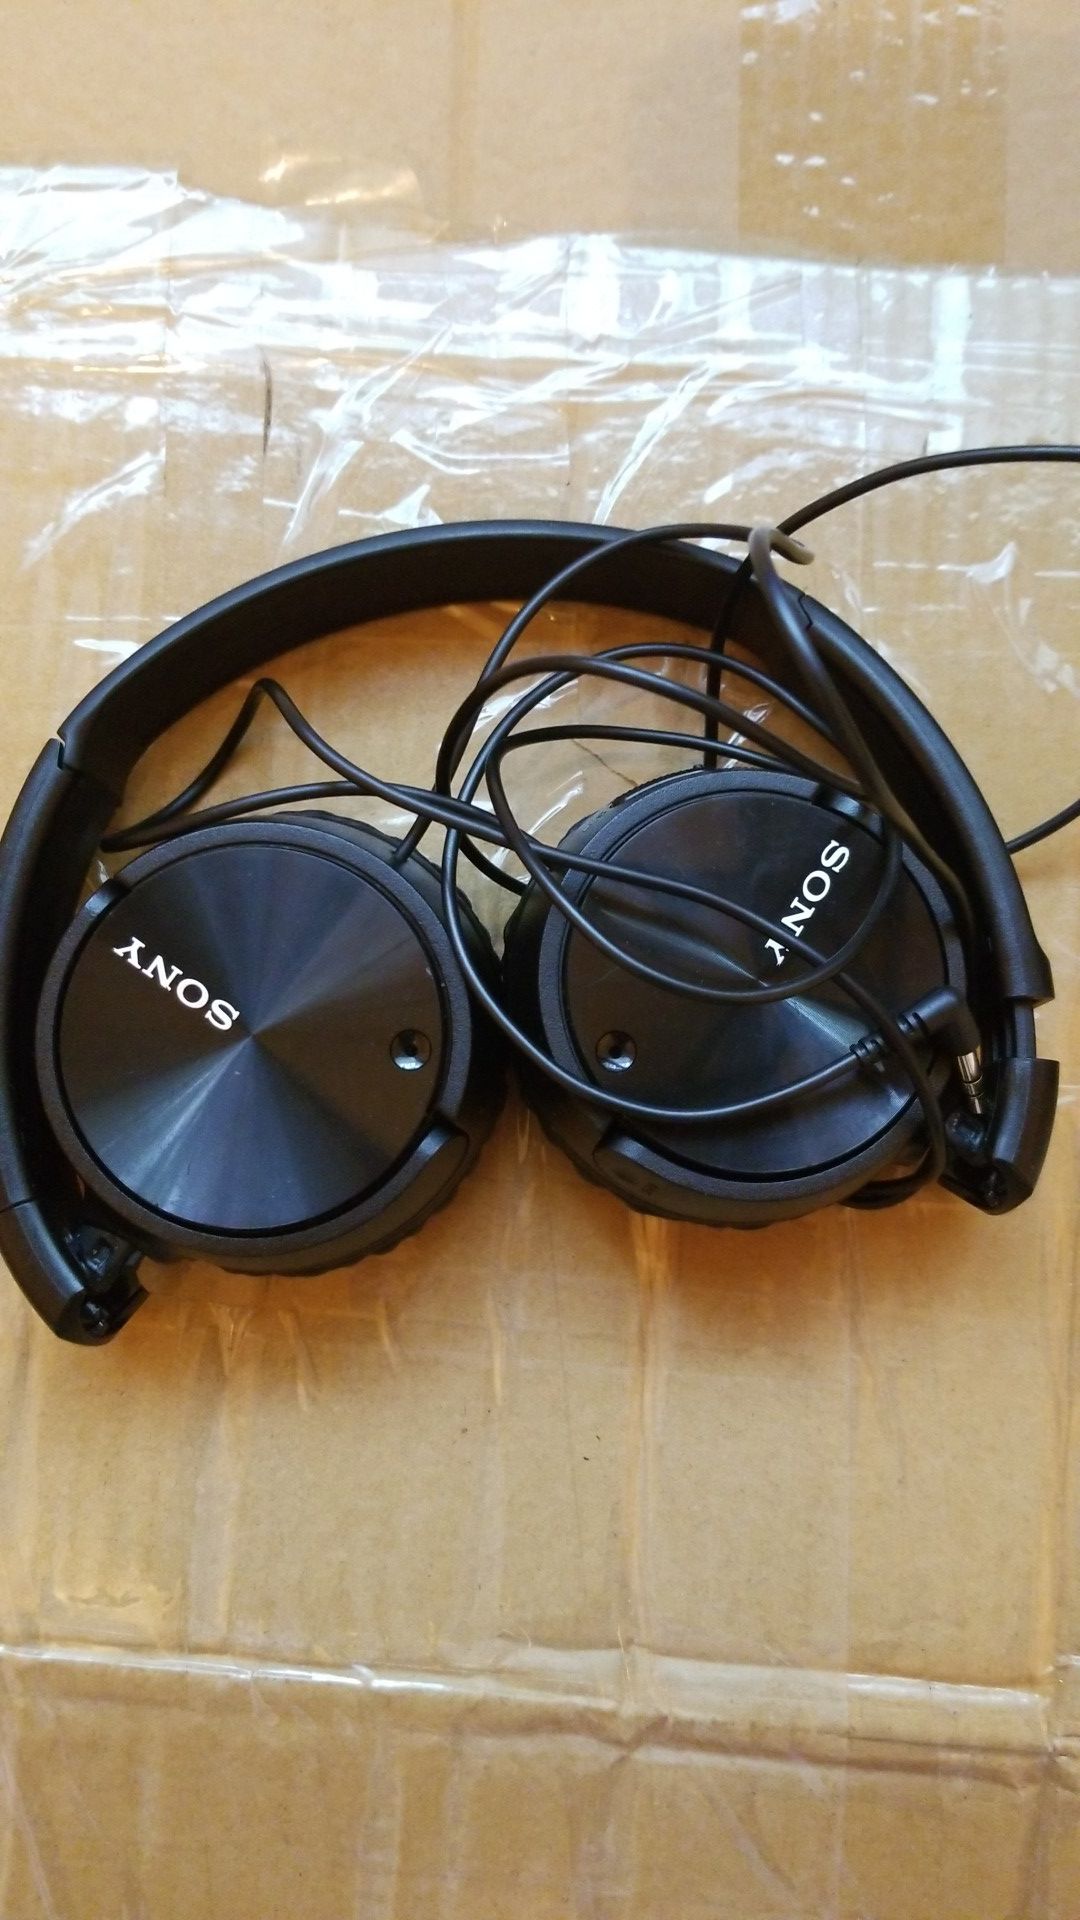 Sony MDR-ZX110 stereo headphones